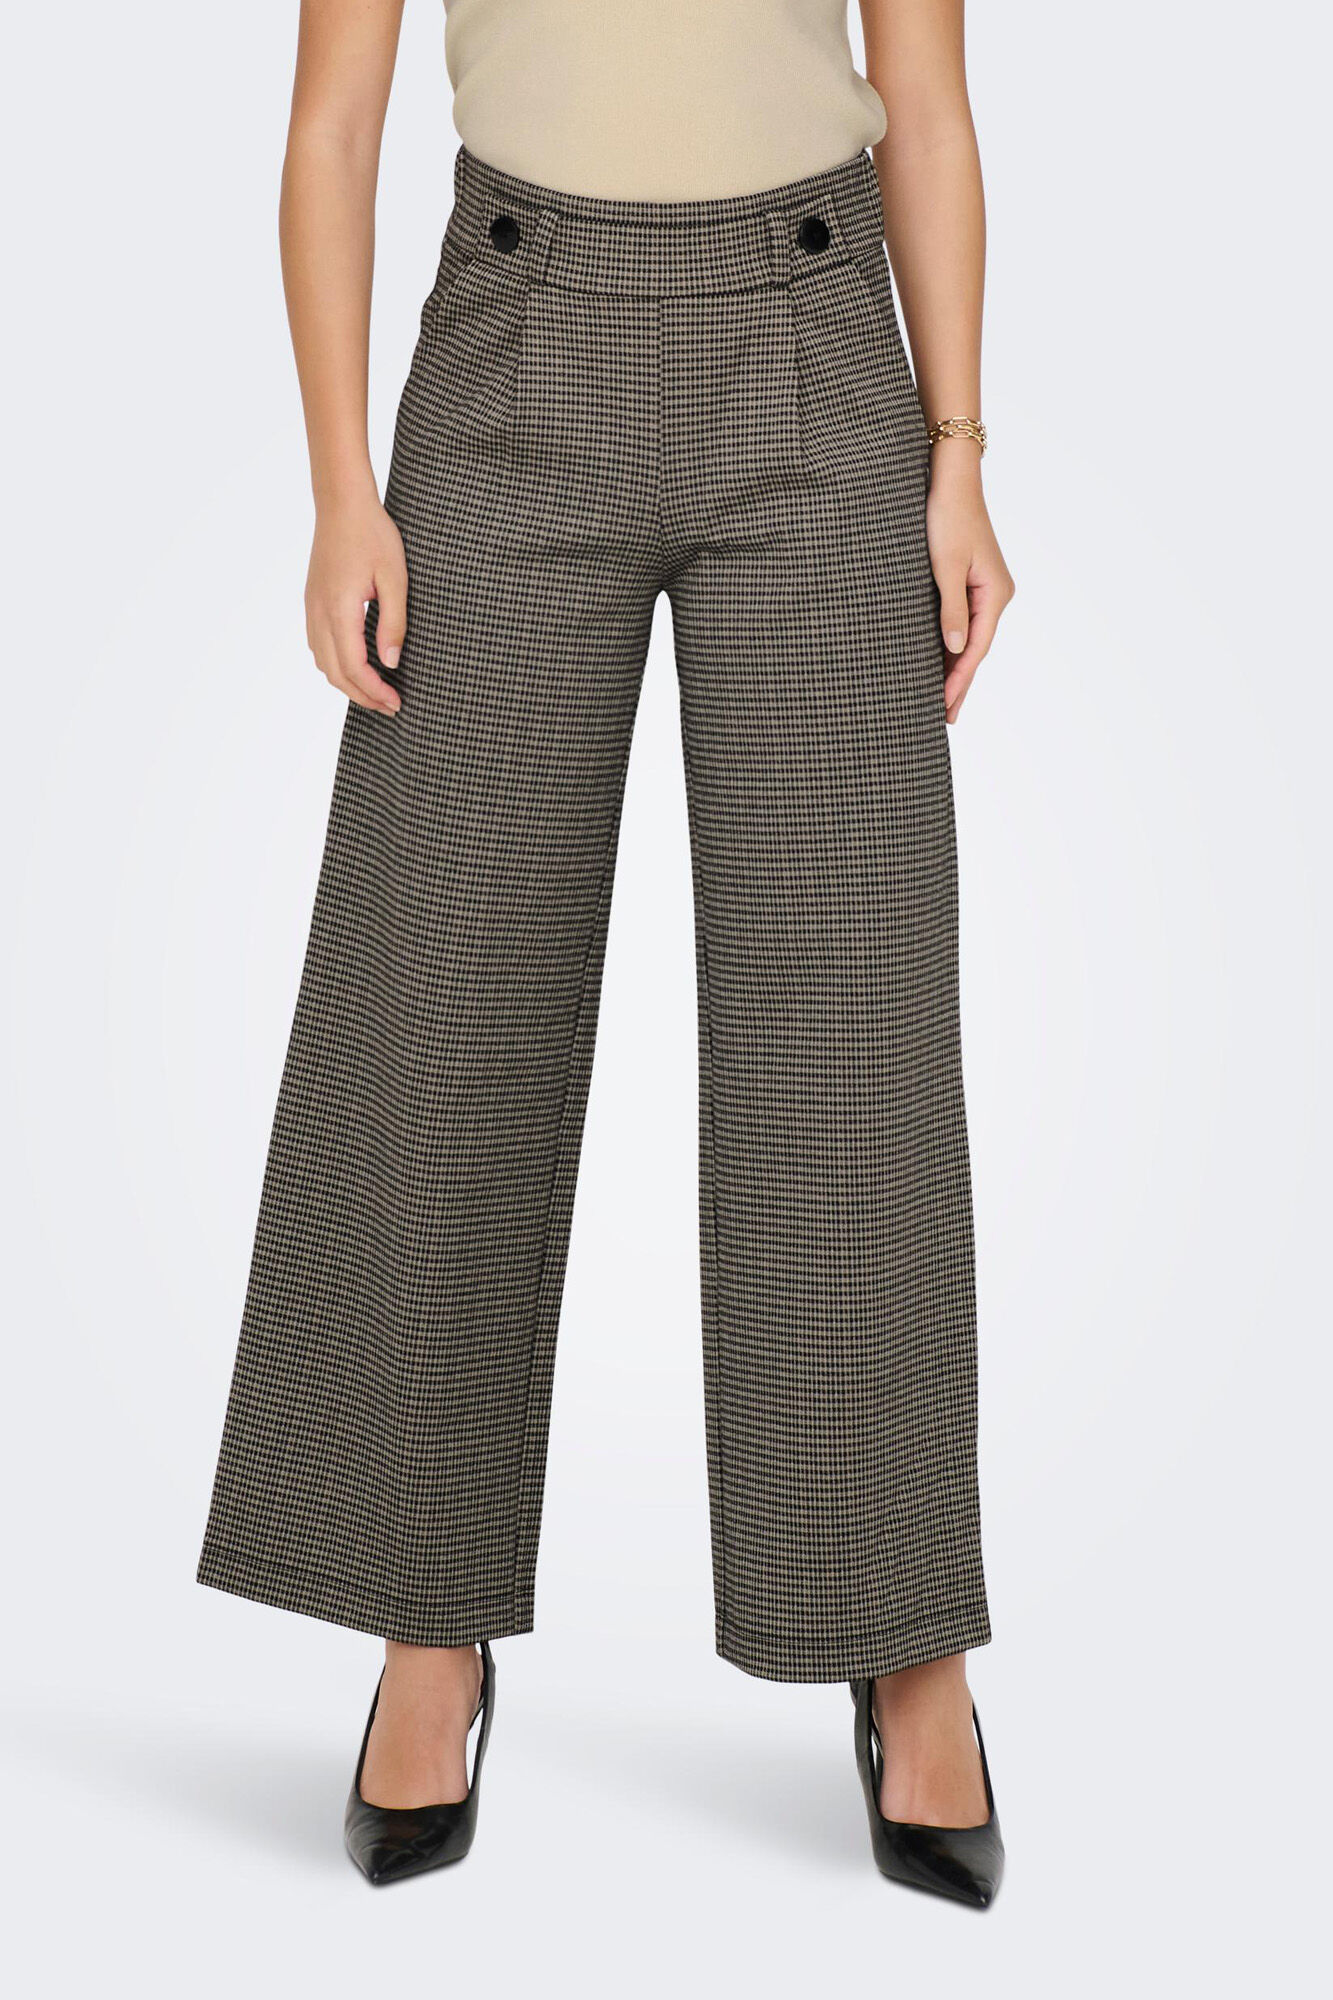 COLLUSION wide leg check trousers in black | ASOS